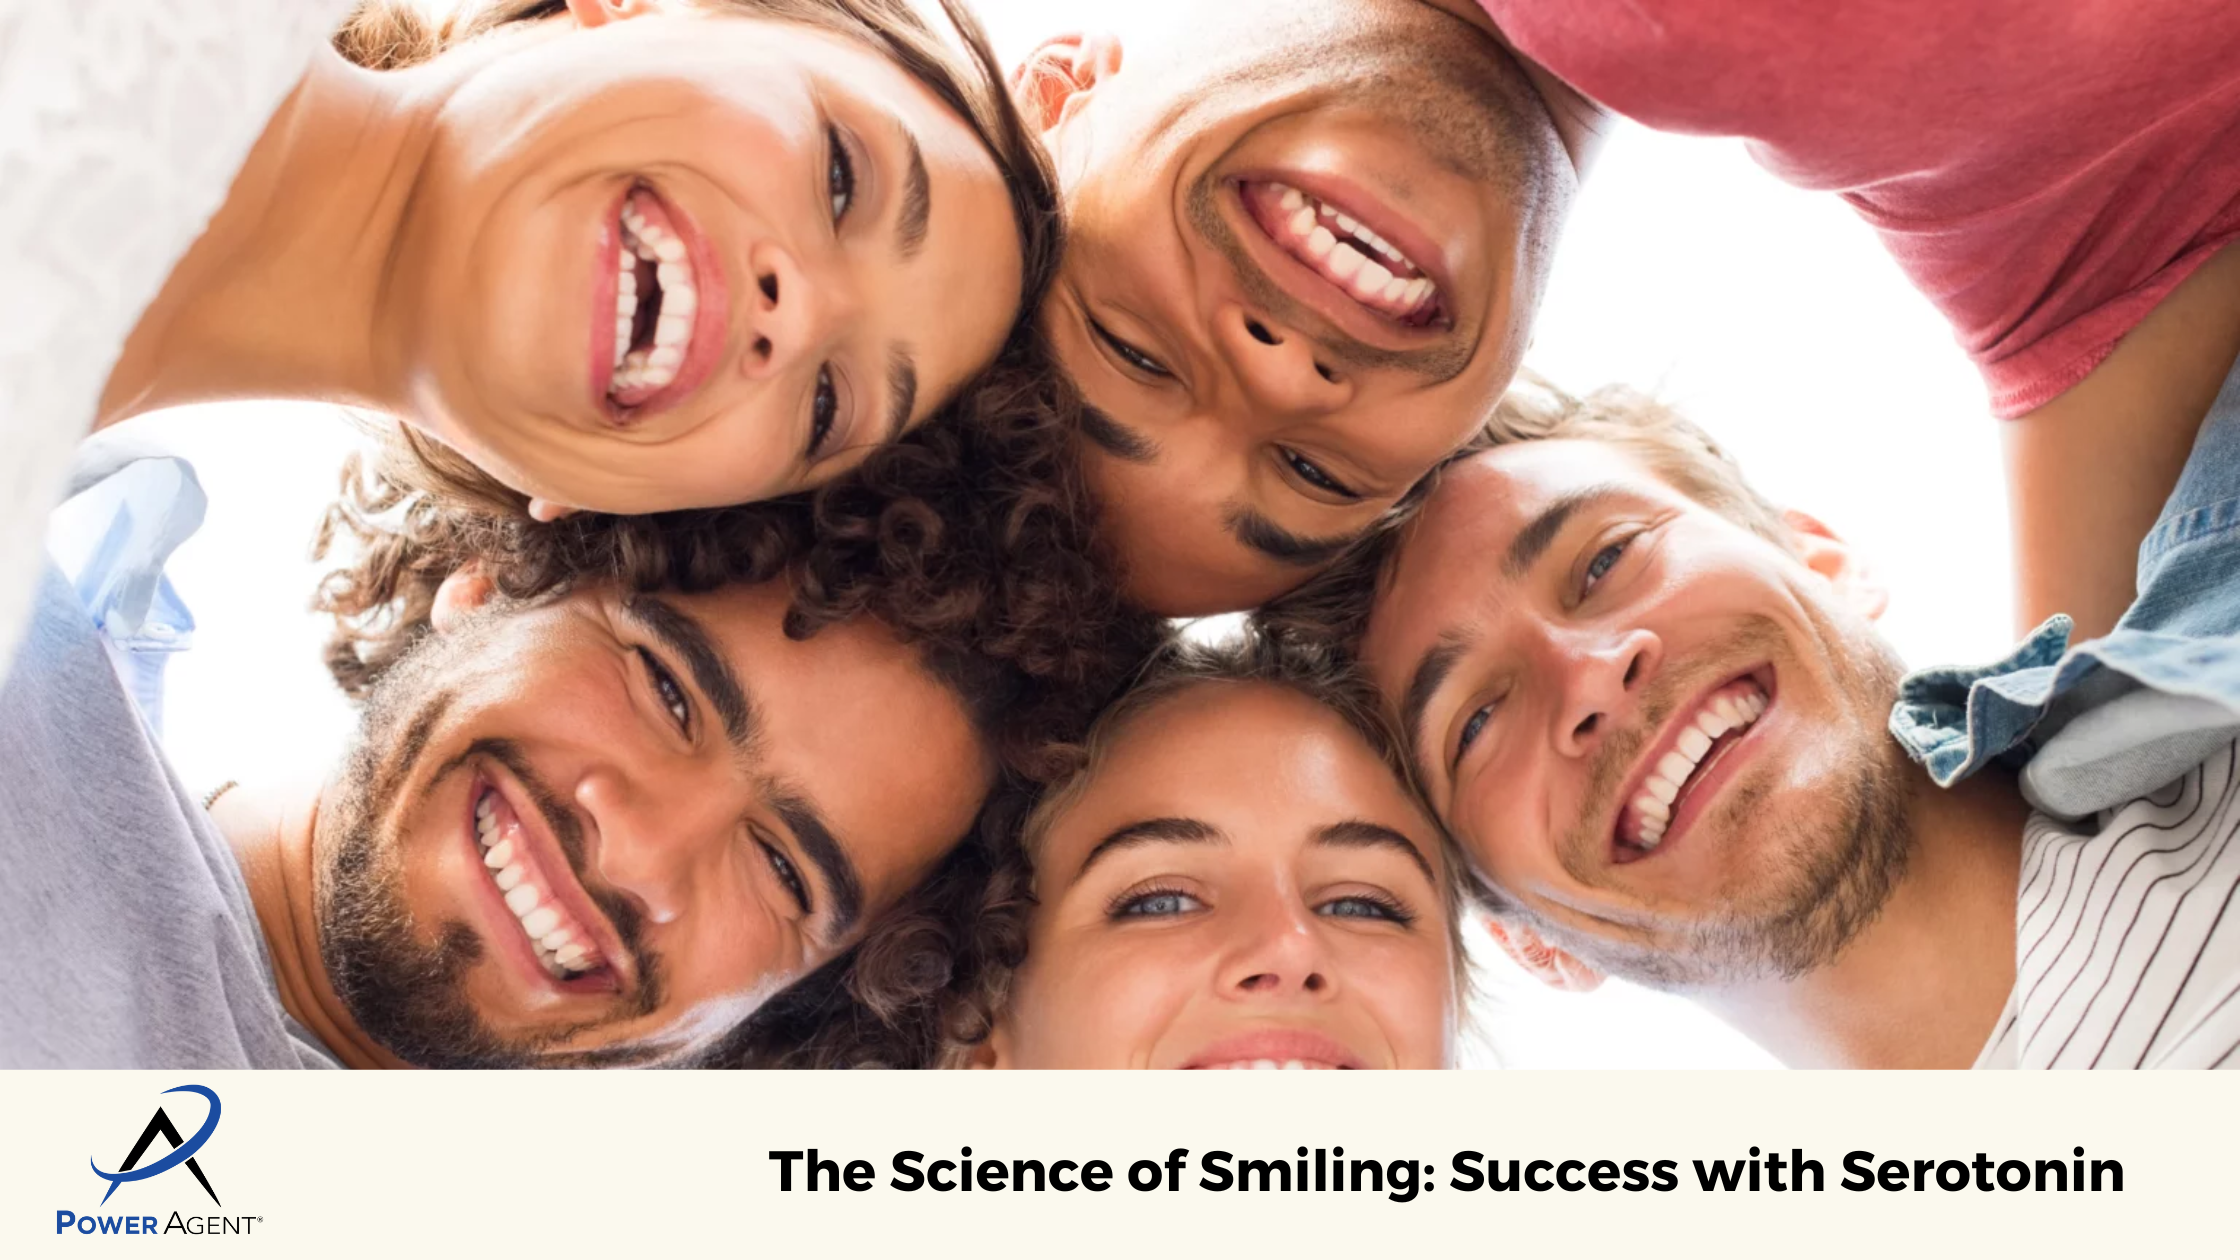 The Science of Smiling: Success with Serotonin